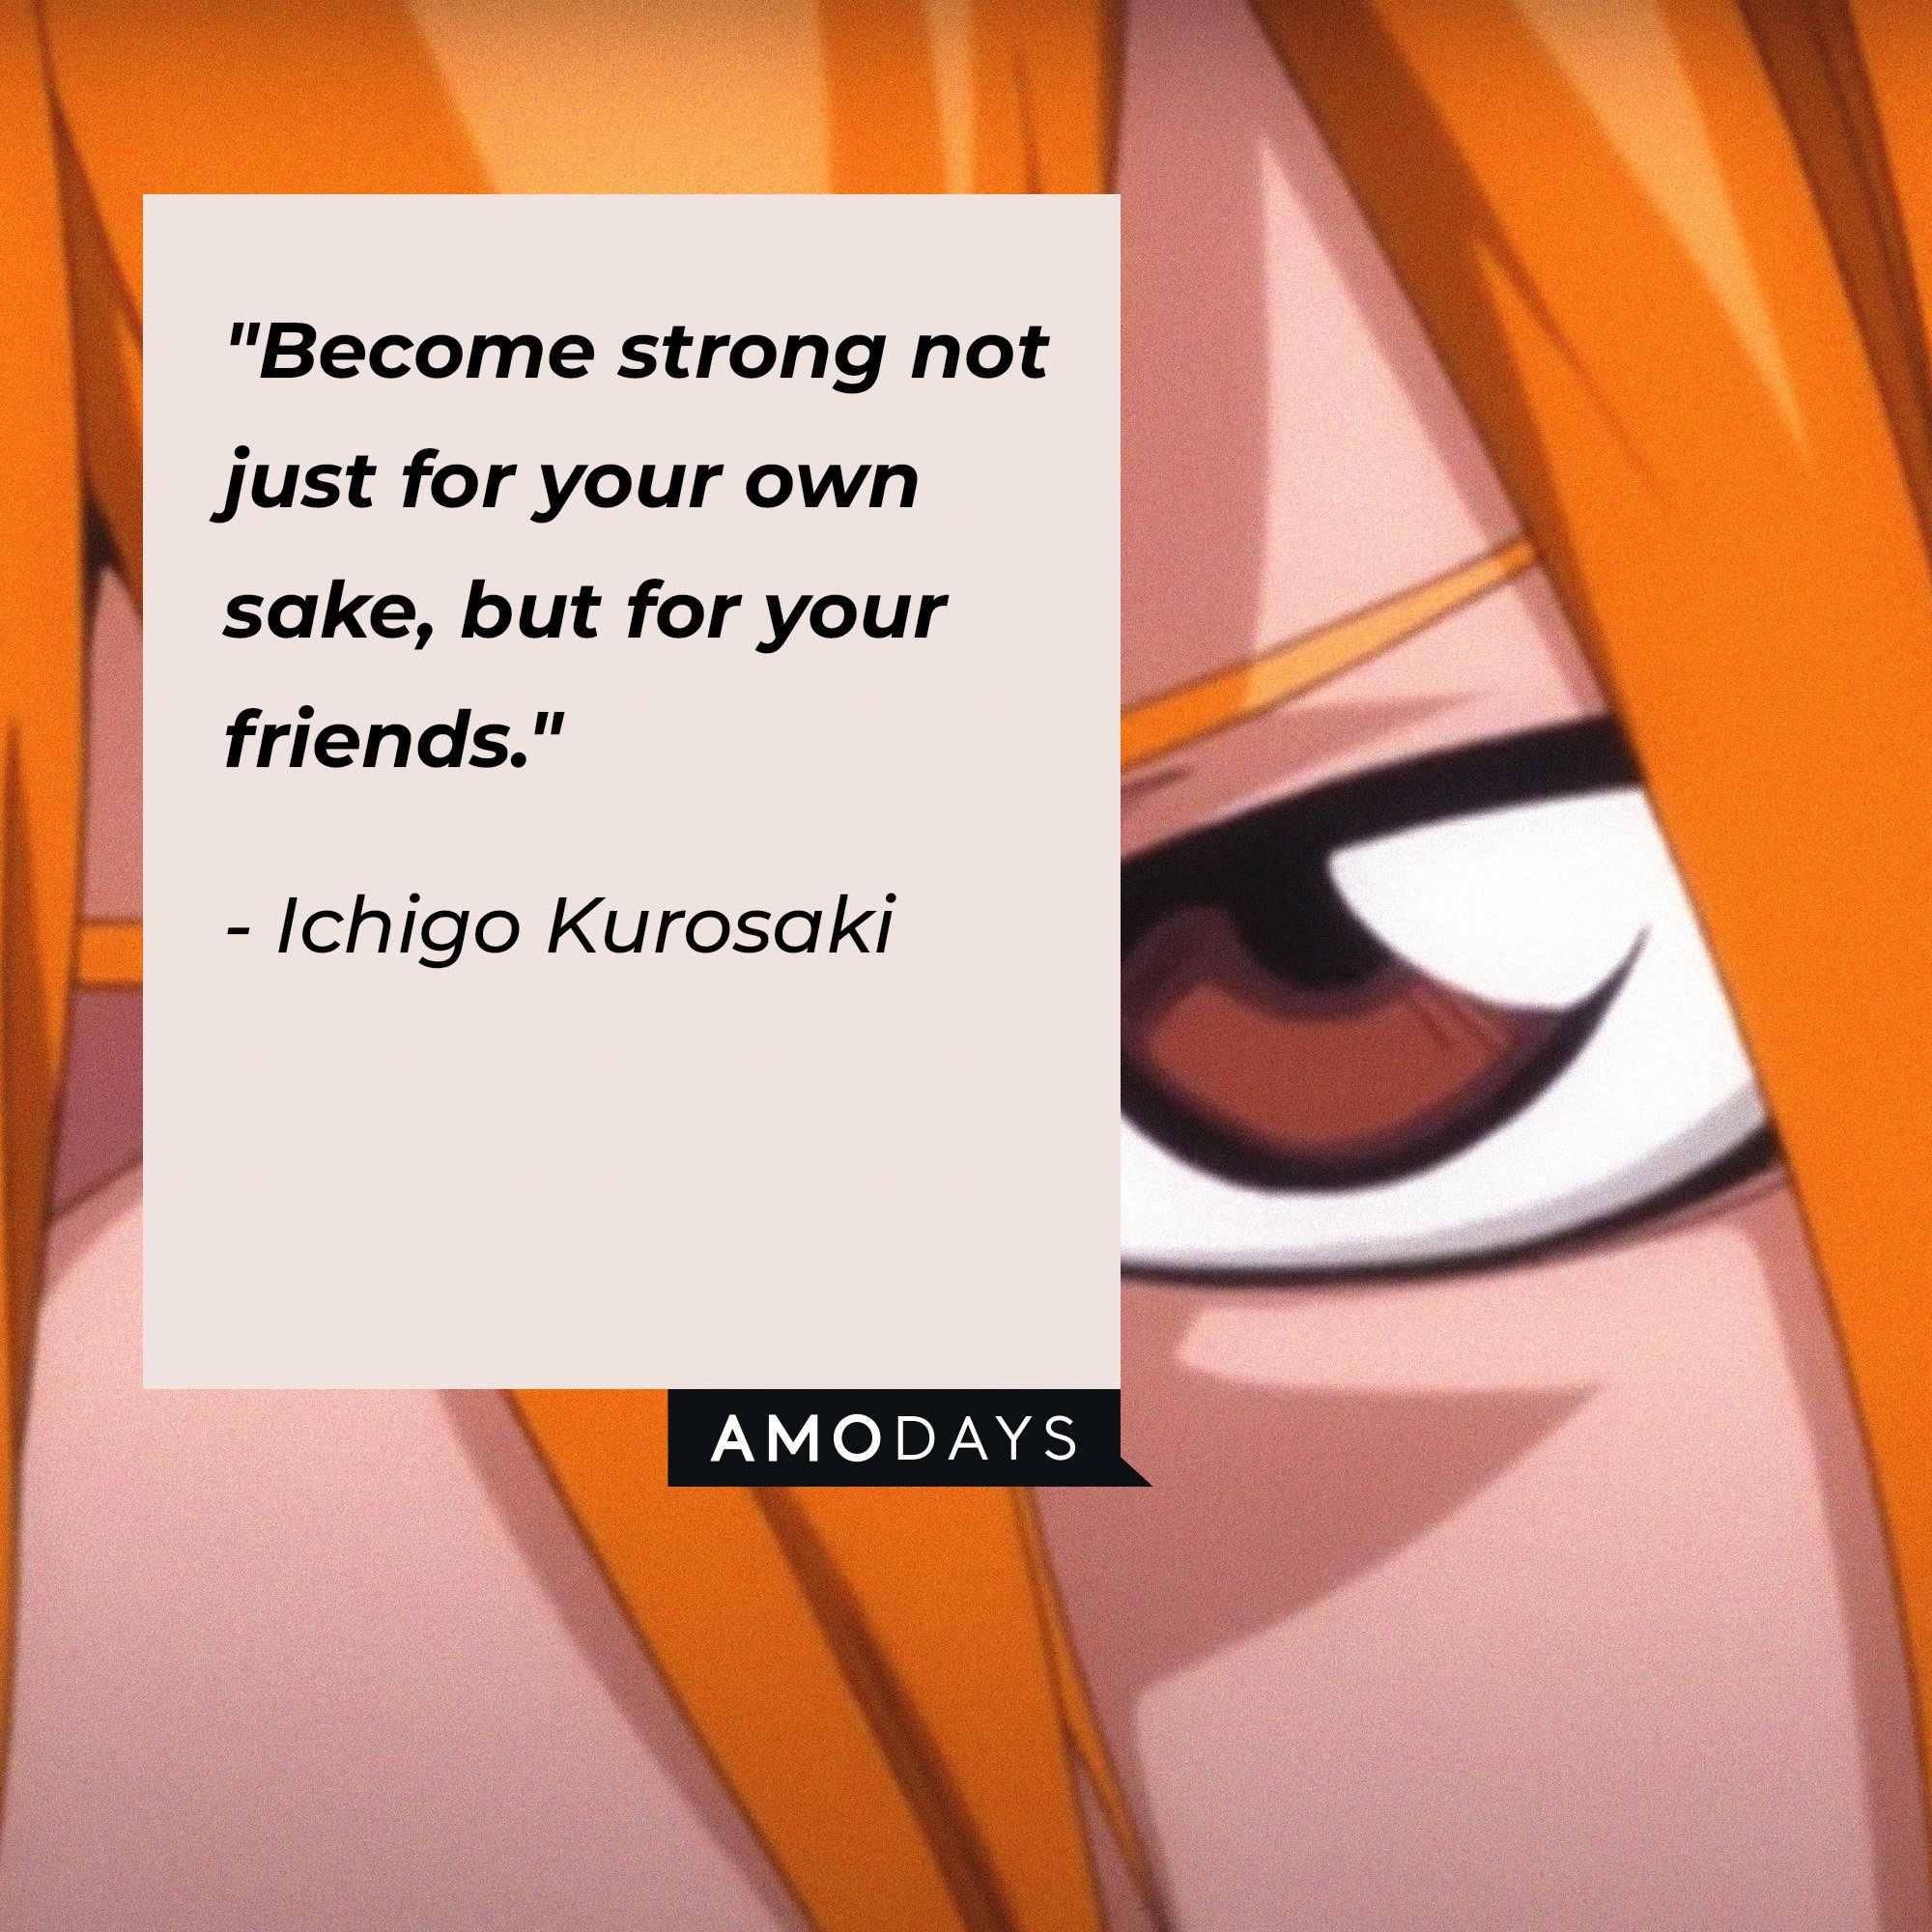 Ichigo Kurosaki’s quote: "Become strong not just for your own sake, but for your friends." | Image: AmoDays